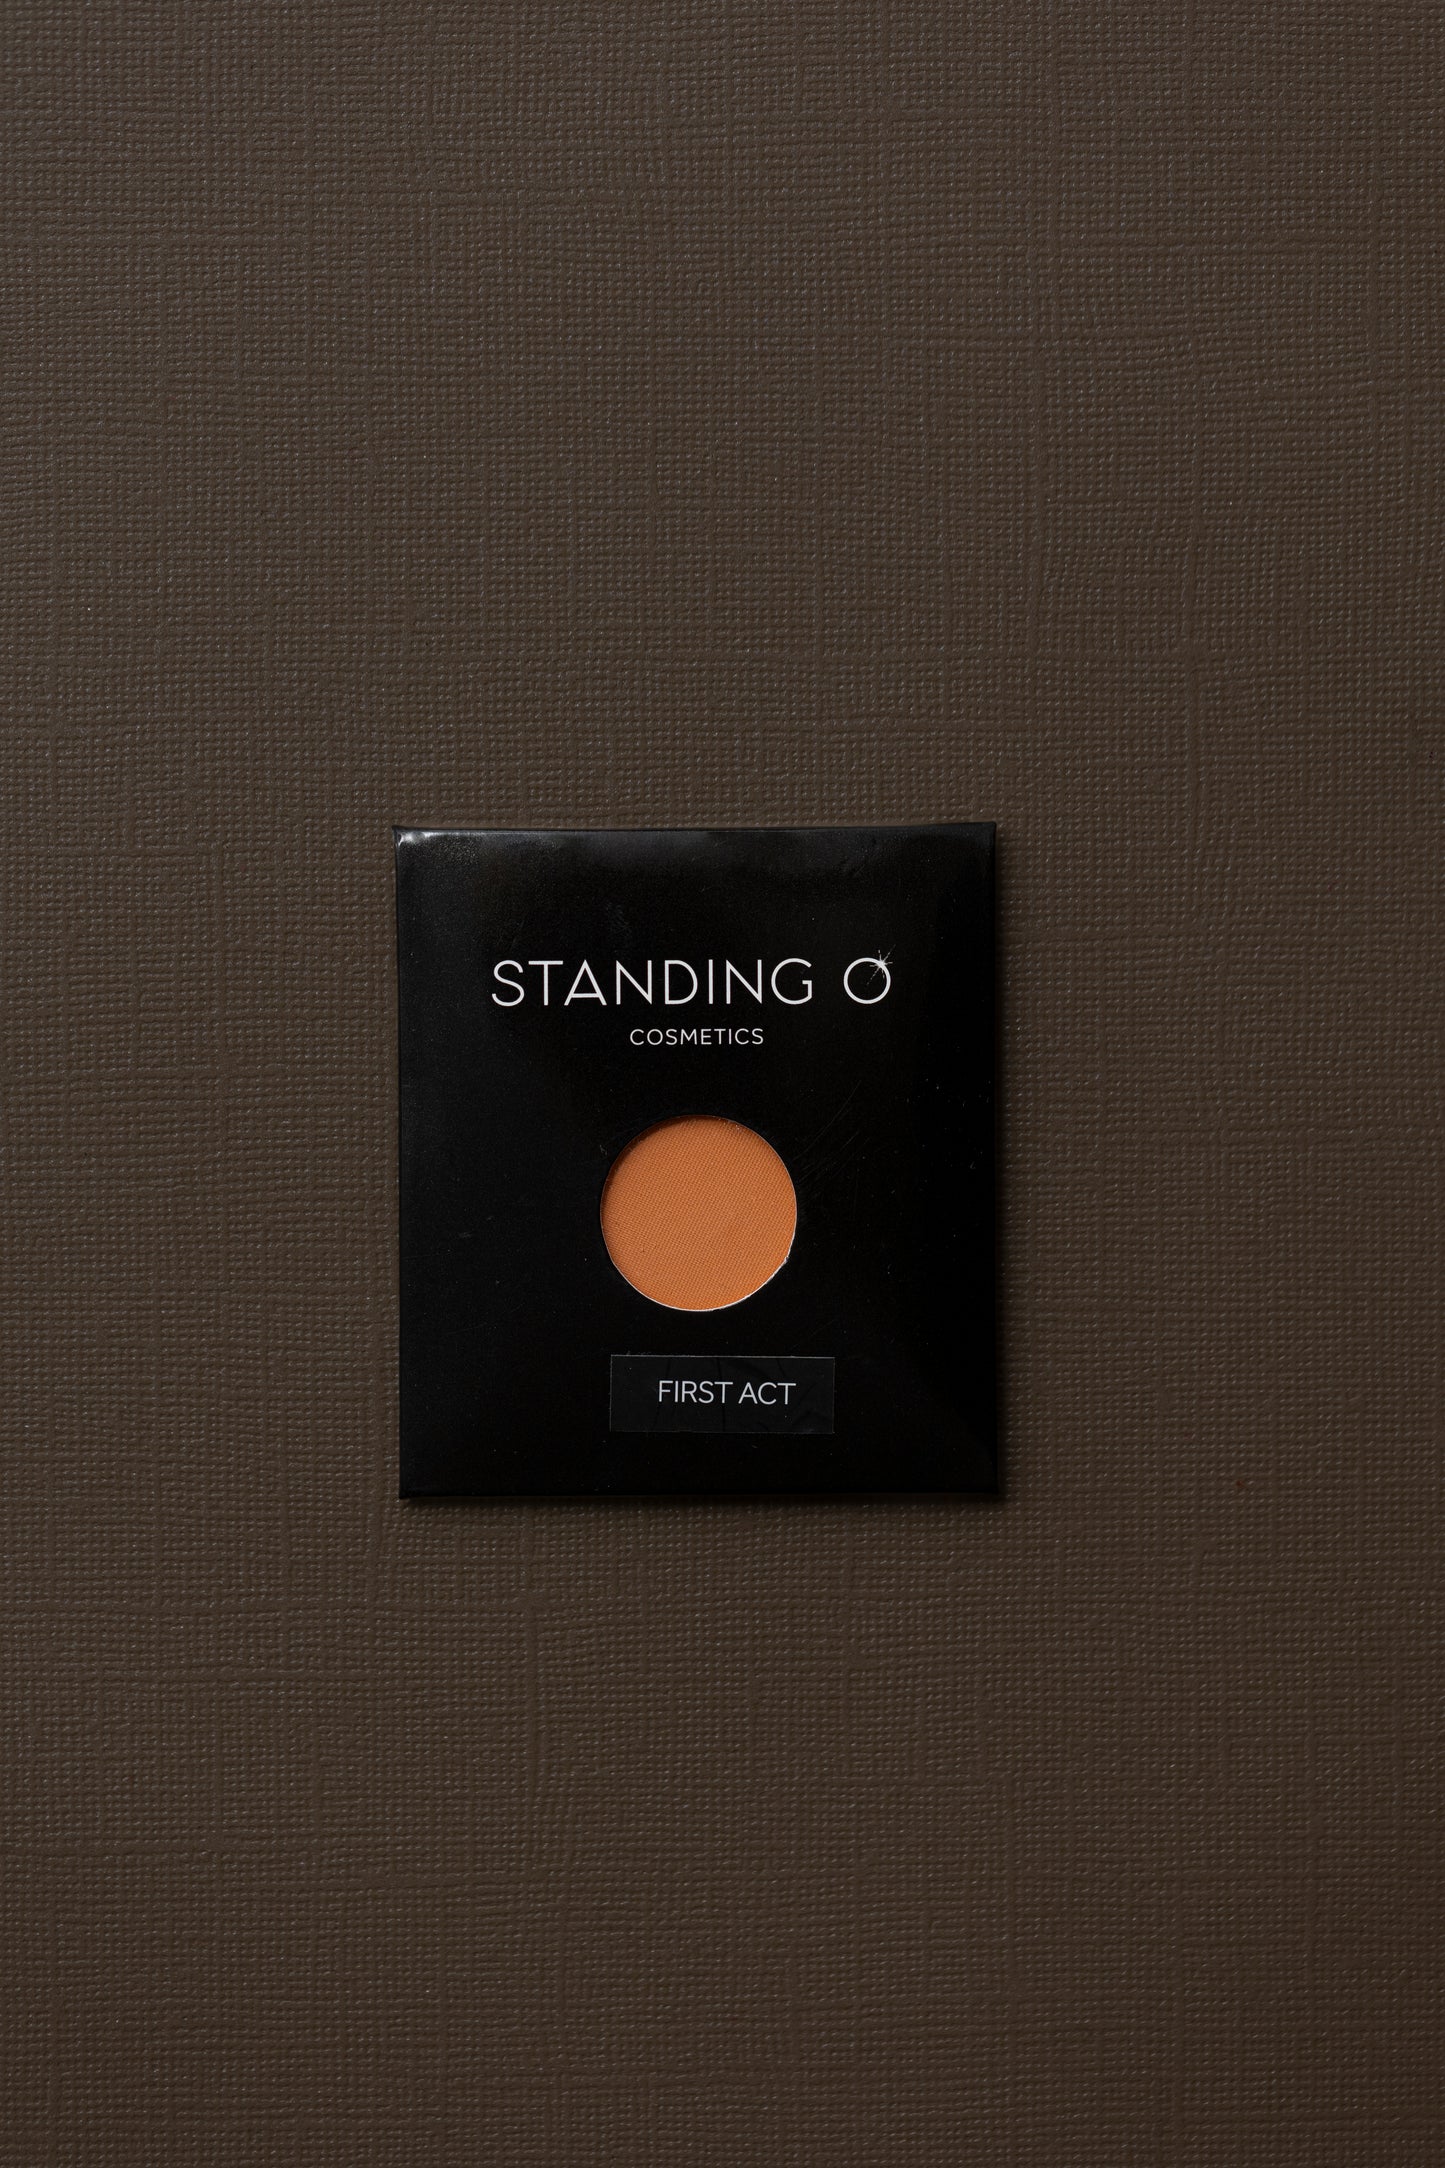 'Standing O' single eyeshadow called 'First Act', a captivating shade with a smooth texture.